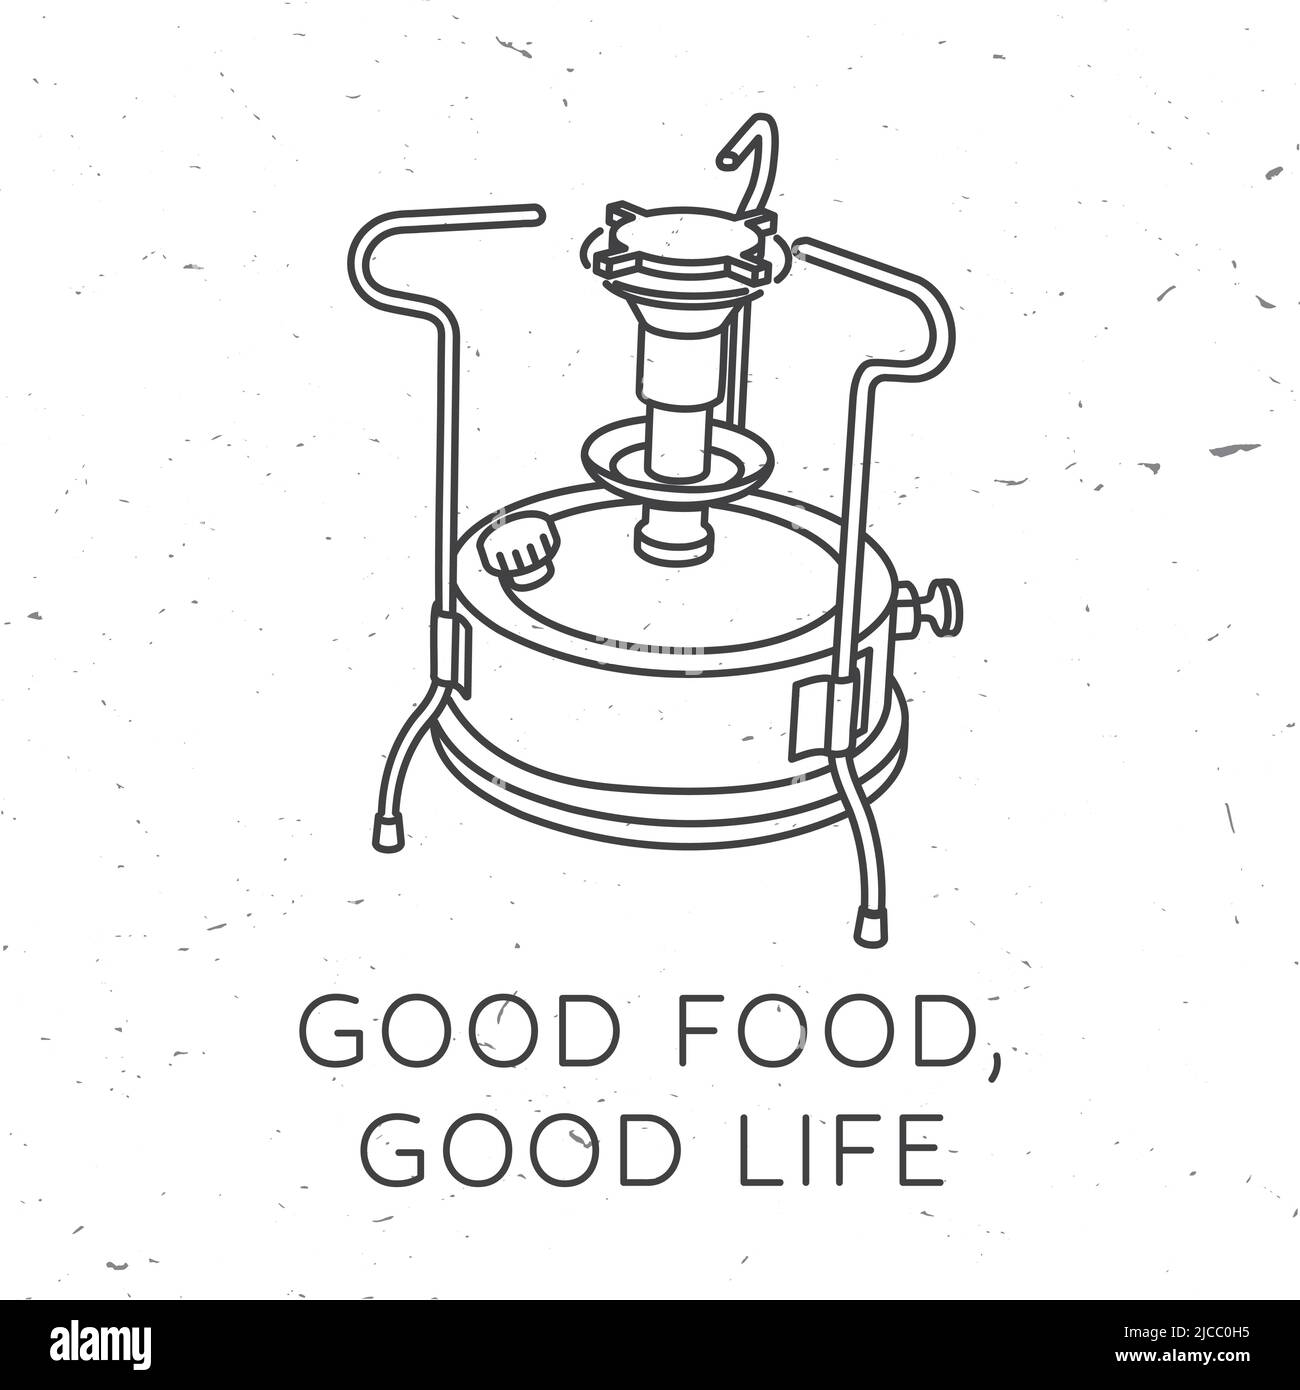 Good food good life. Live, love, travel. Vector illustration. Concept for shirt or logo, print, stamp or tee. Vintage line art design with camping Stock Vector